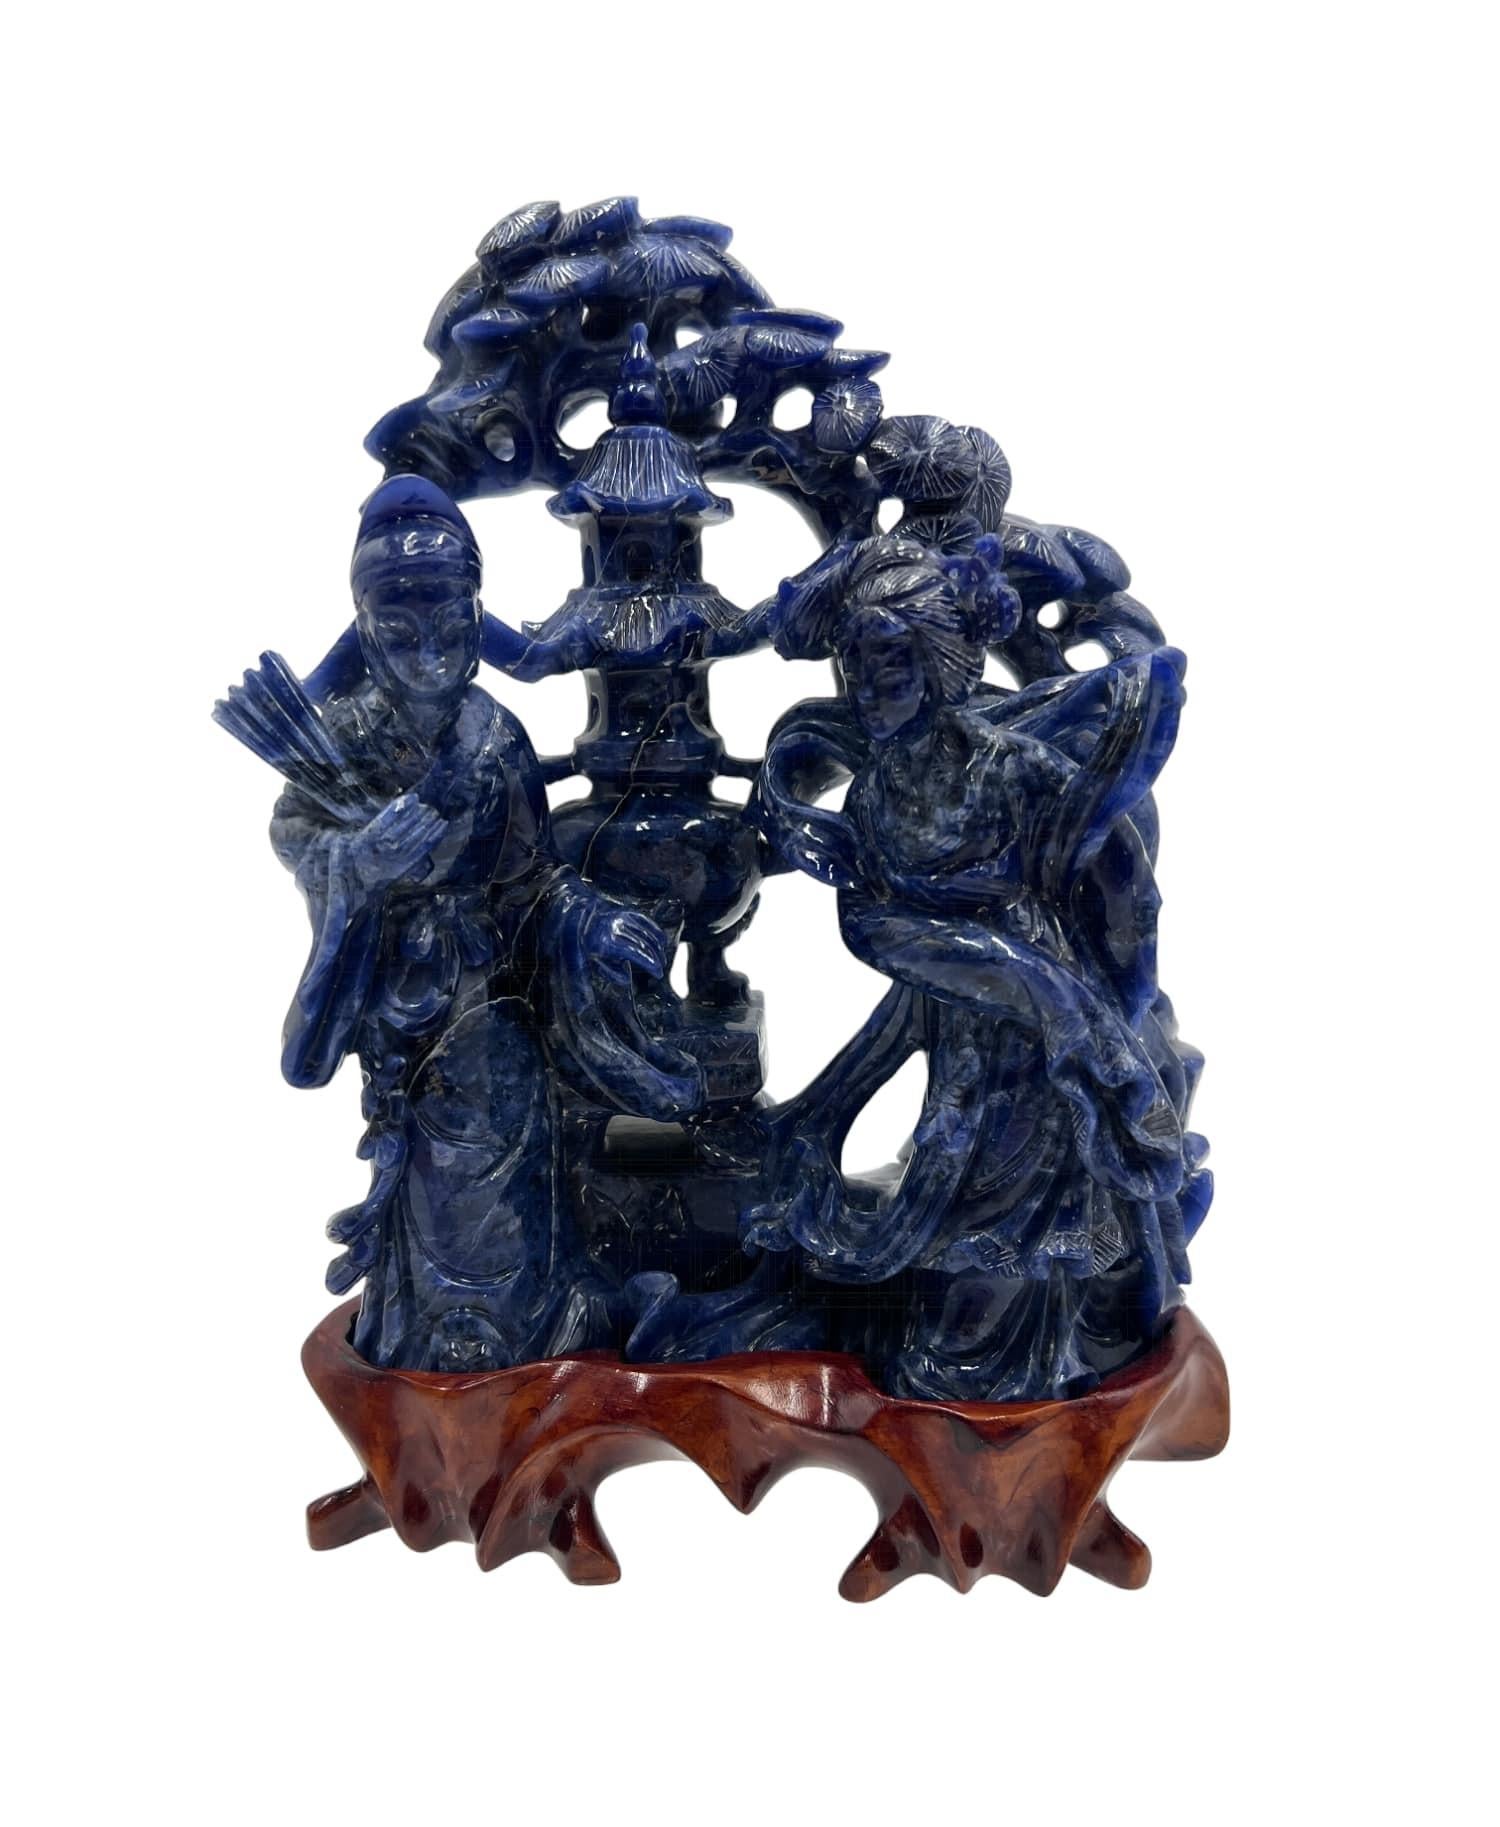 An exquisitely carved Lapis Lazuli figurine depicting an Emperor and Empress in the style of the late Ming to early Qing Dynasty.

Crafted from genuine Lapis Lazuli, a rare and precious gemstone revered for its deep blue hue and natural variations,